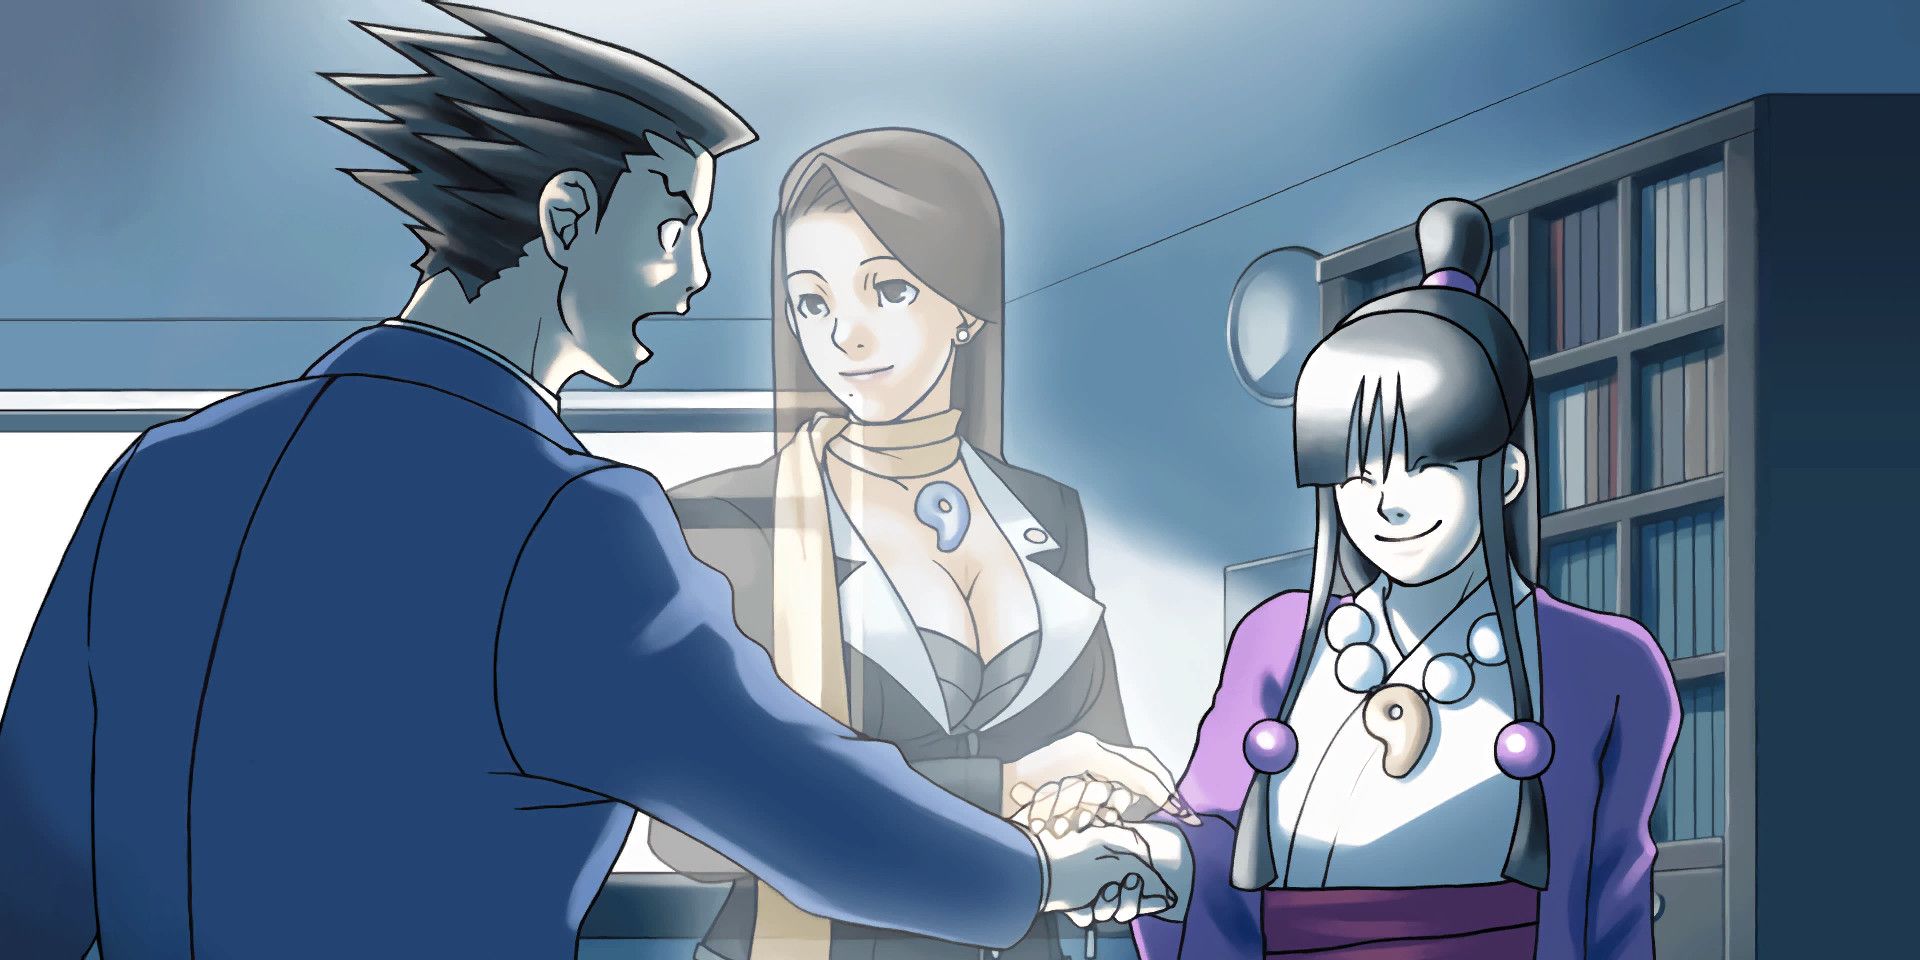 Mia's spirit watches over Phoenix and Maya in Ace Attorney